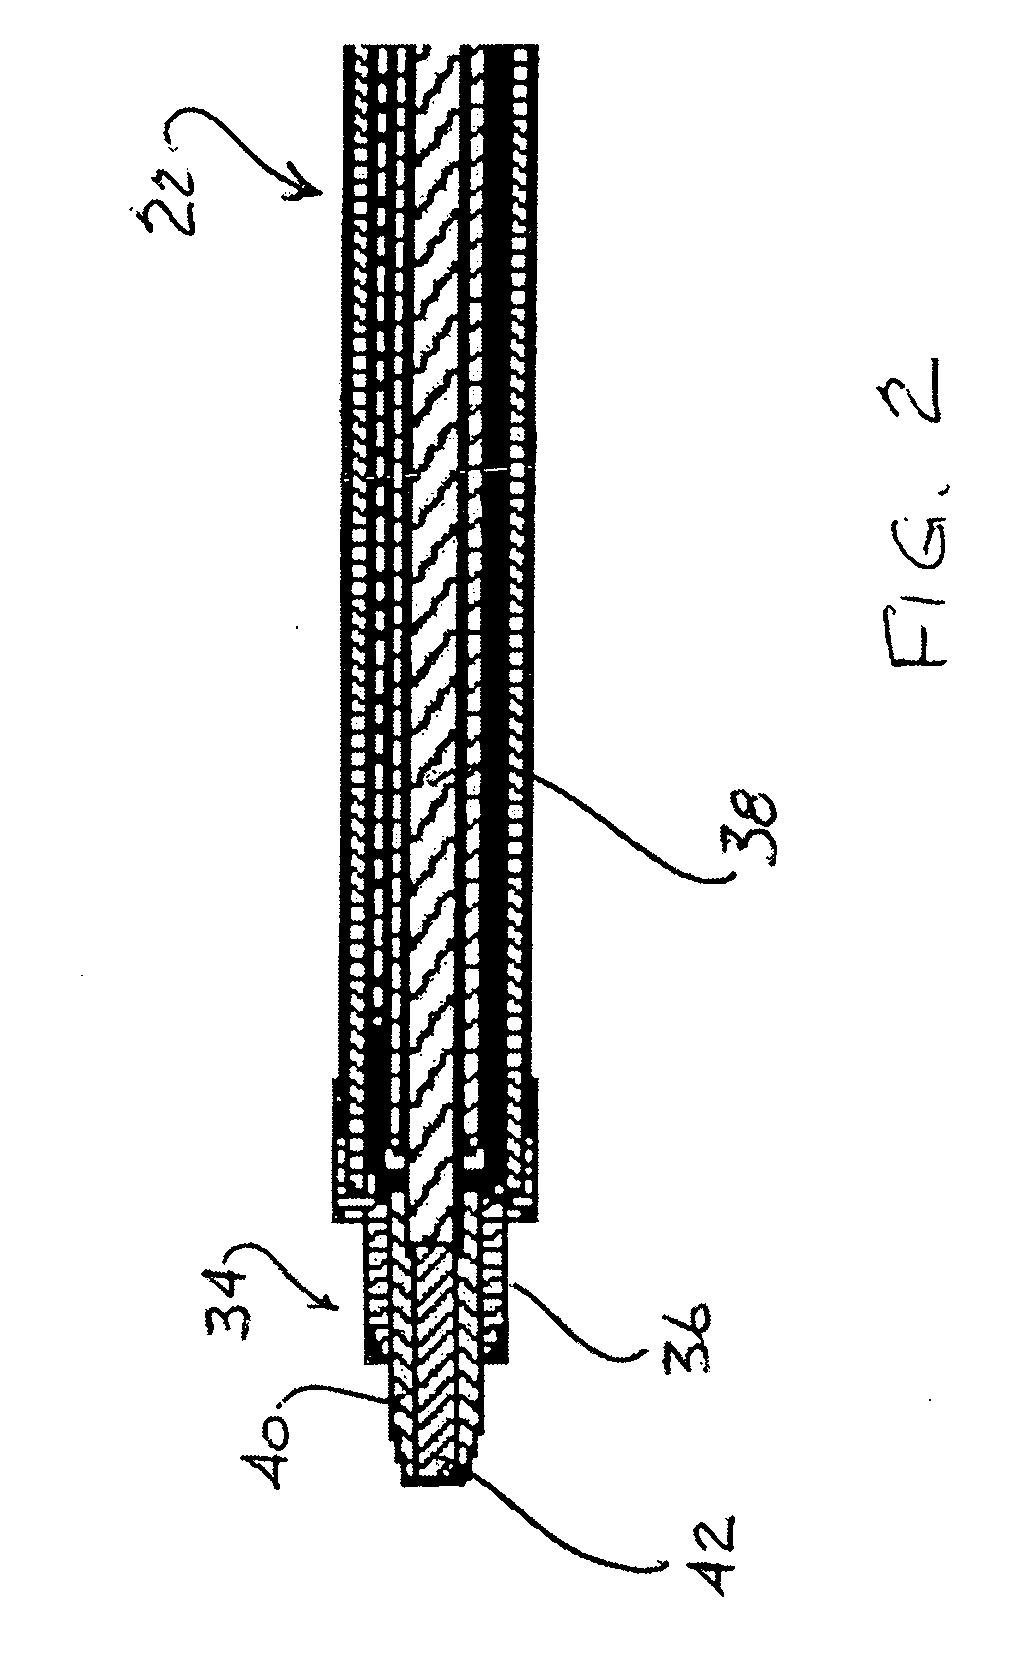 Phototherapy light with fresnel lens for infant care apparatus